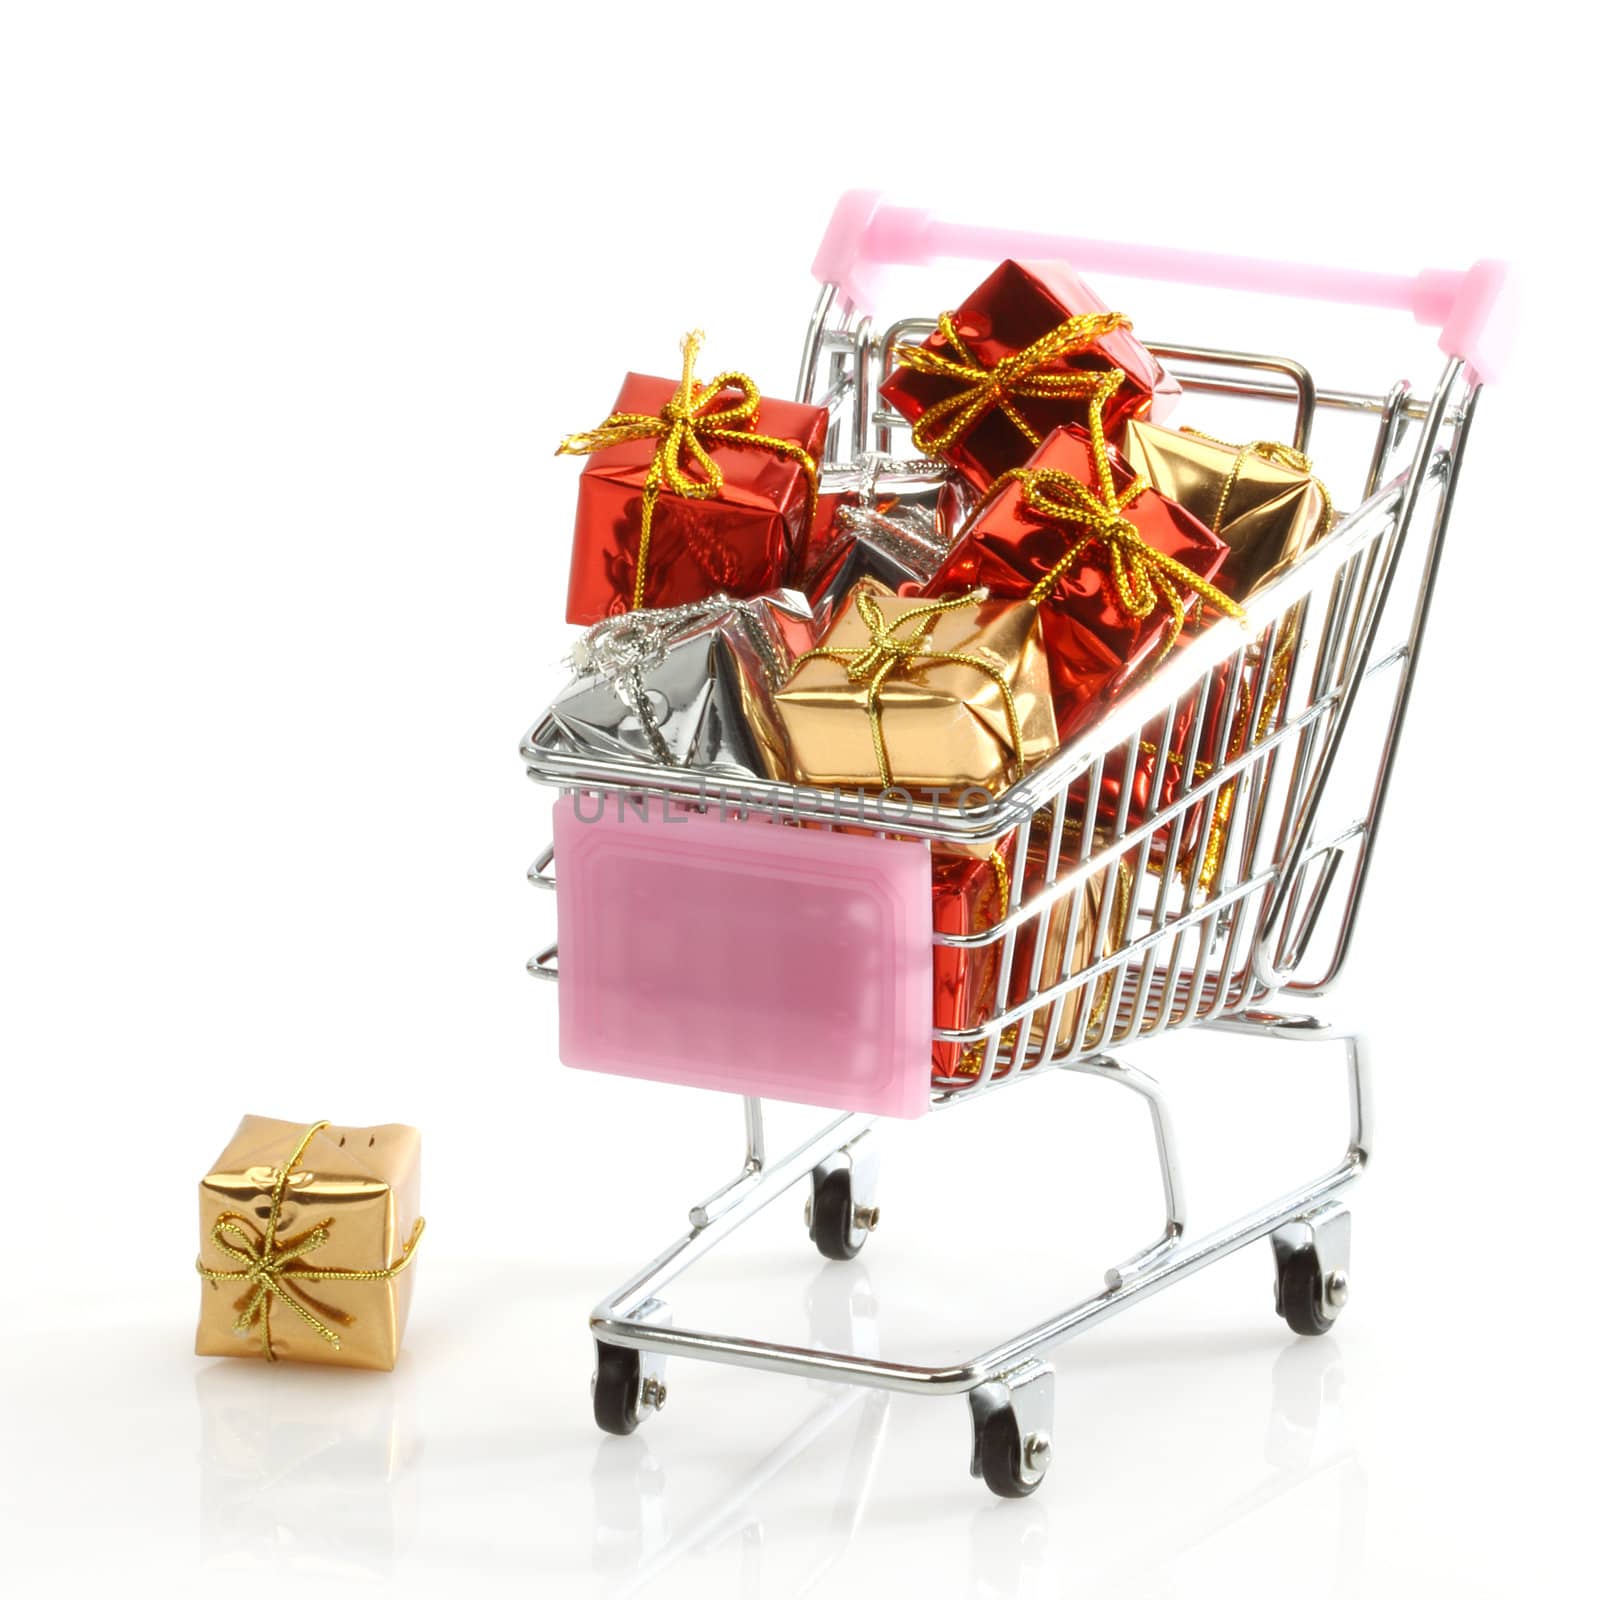 shopping cart filled with gifts over white 